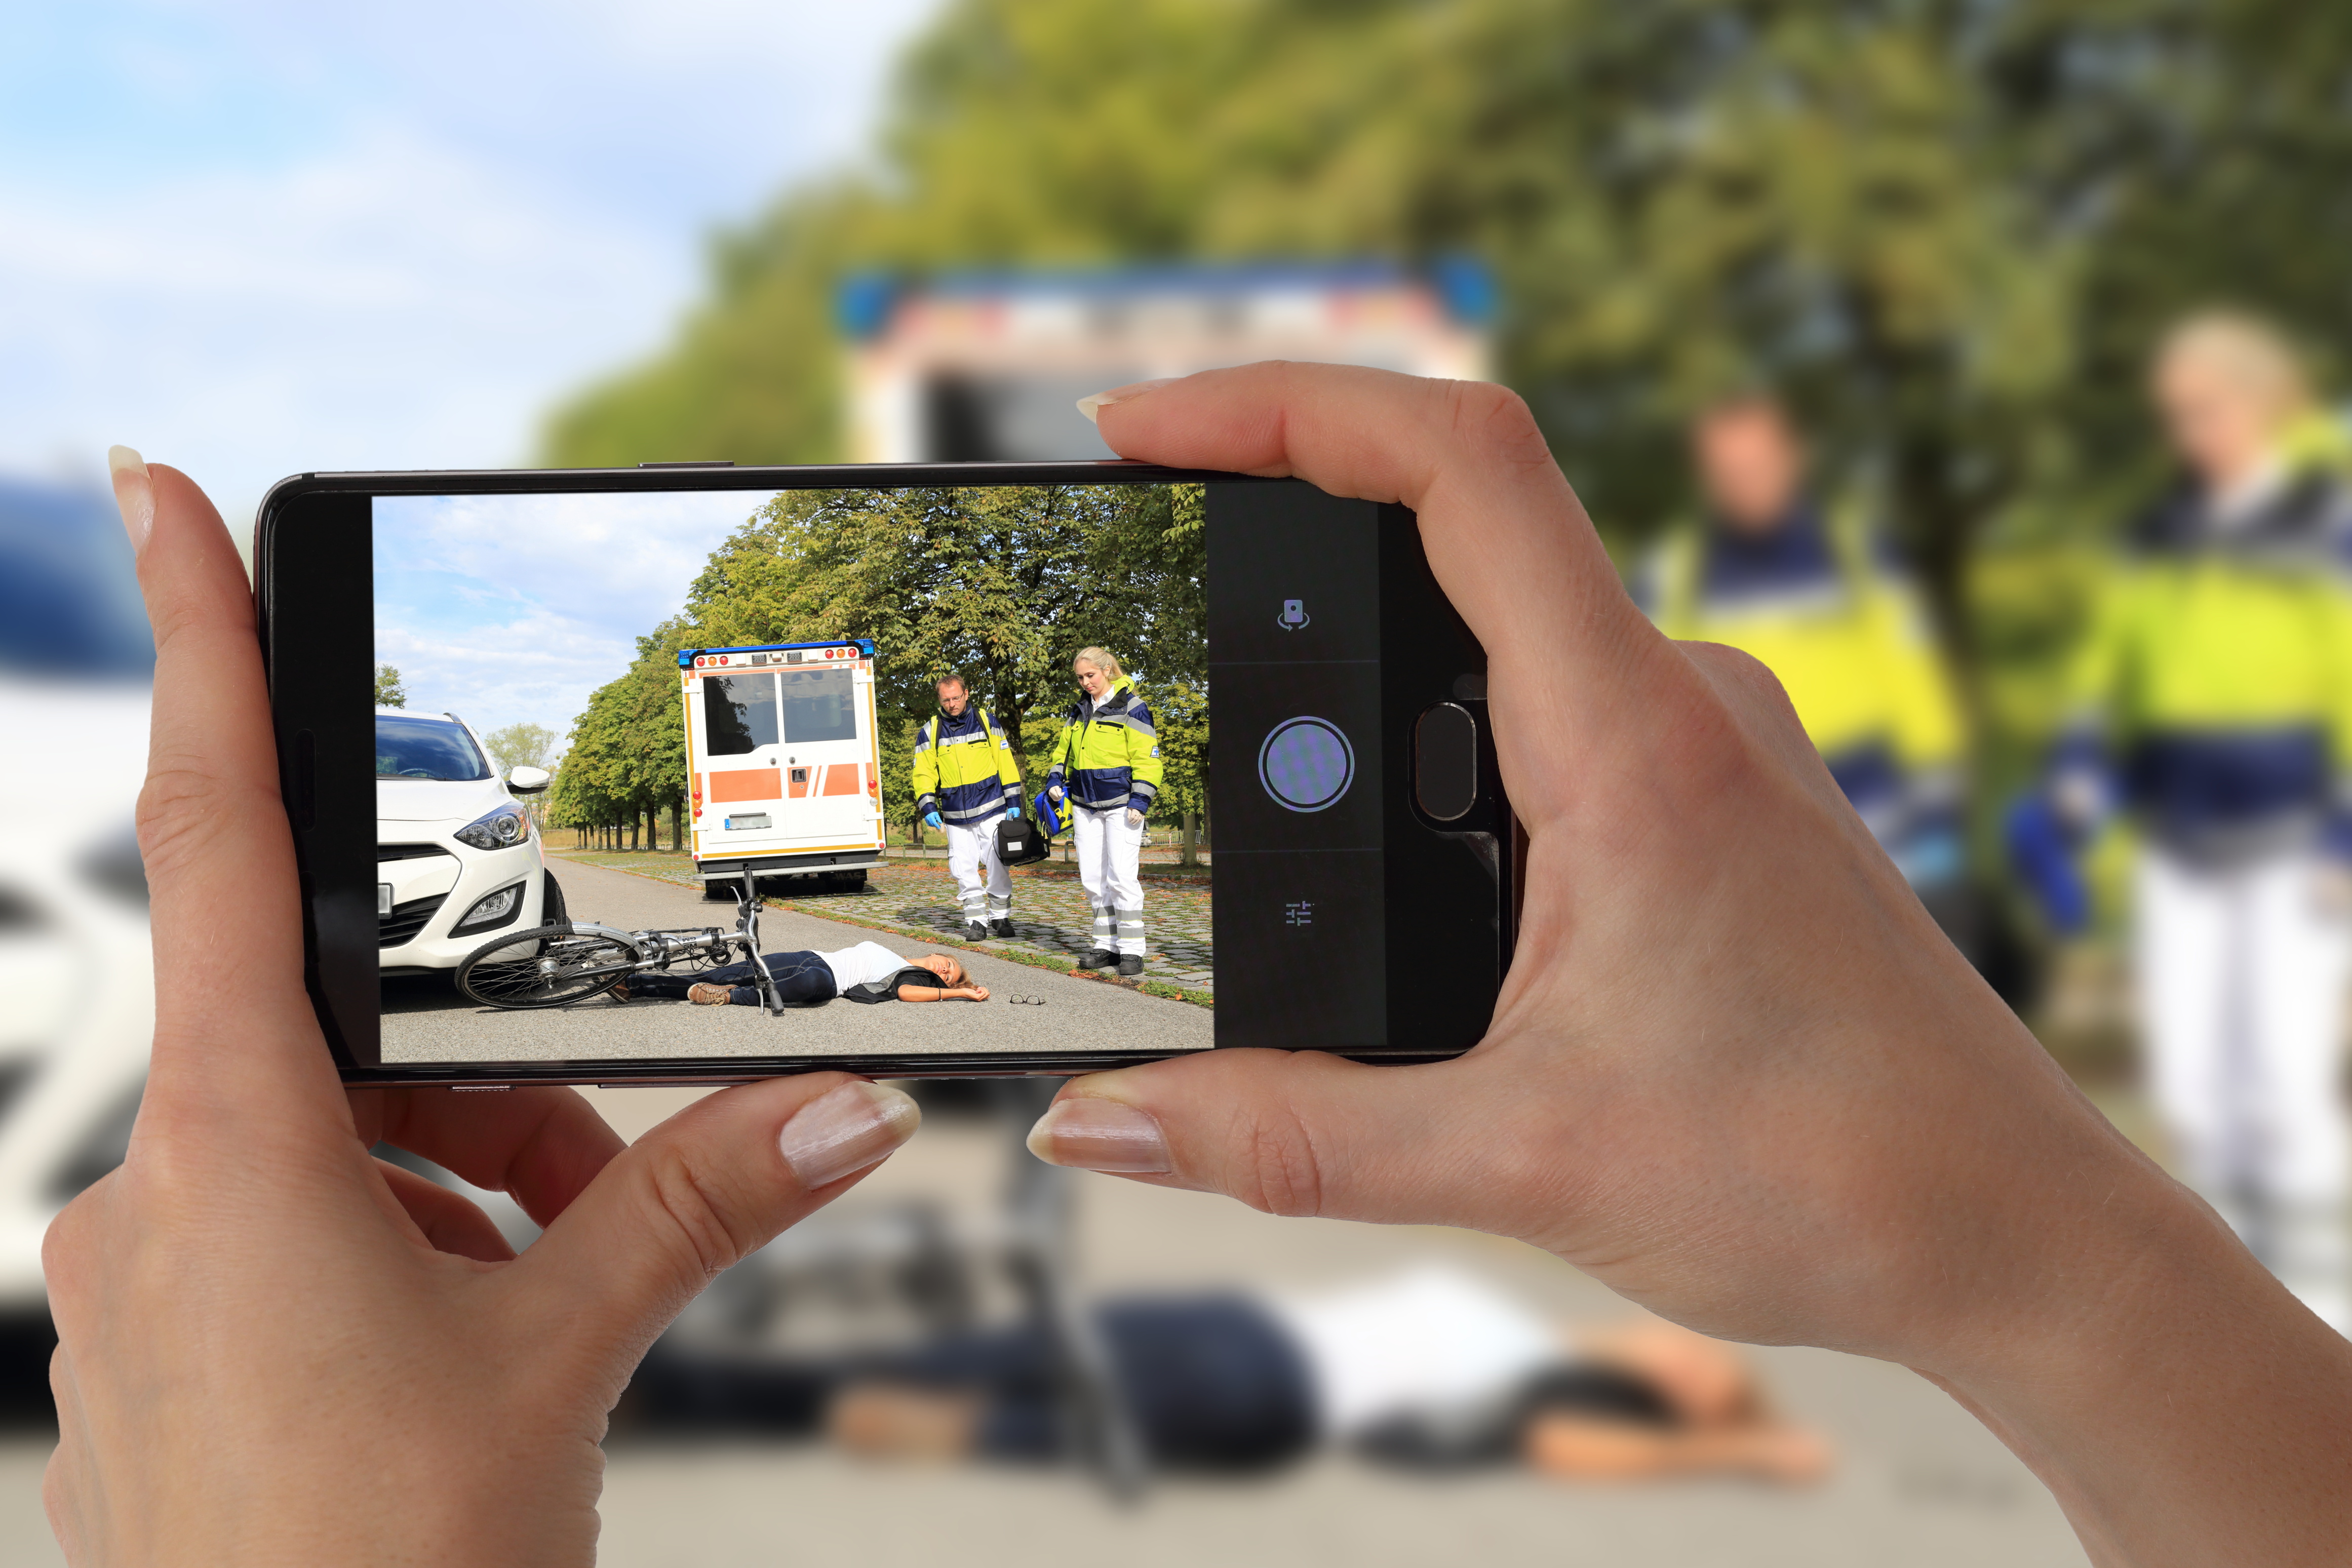 Smartphone shows picture of an accident